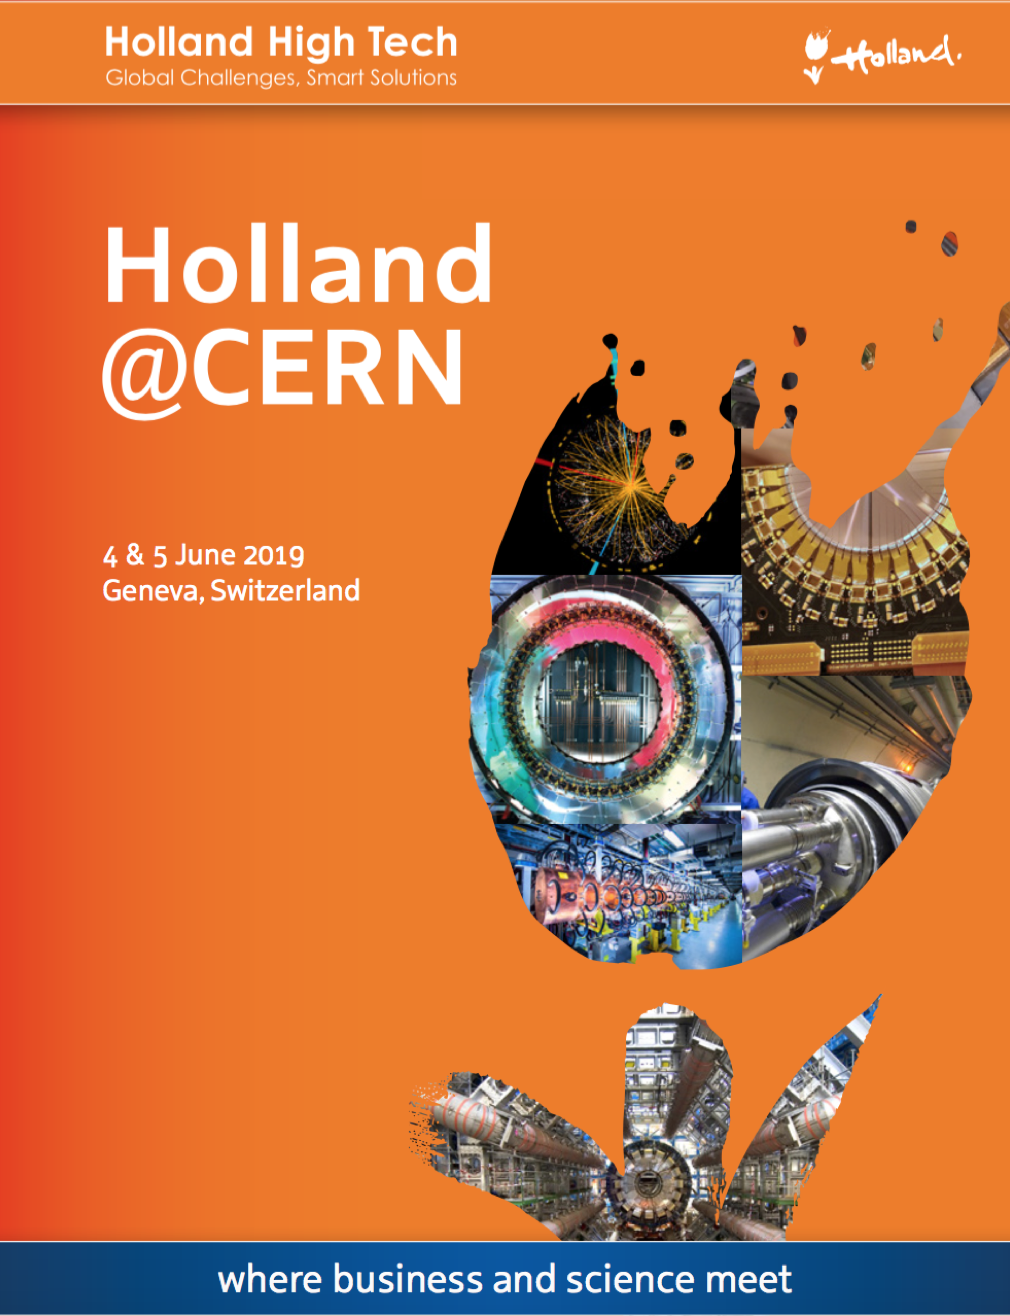 On Tuesday 4 and Wednesday 5 June, 25 Dutch firms will be present at CERN